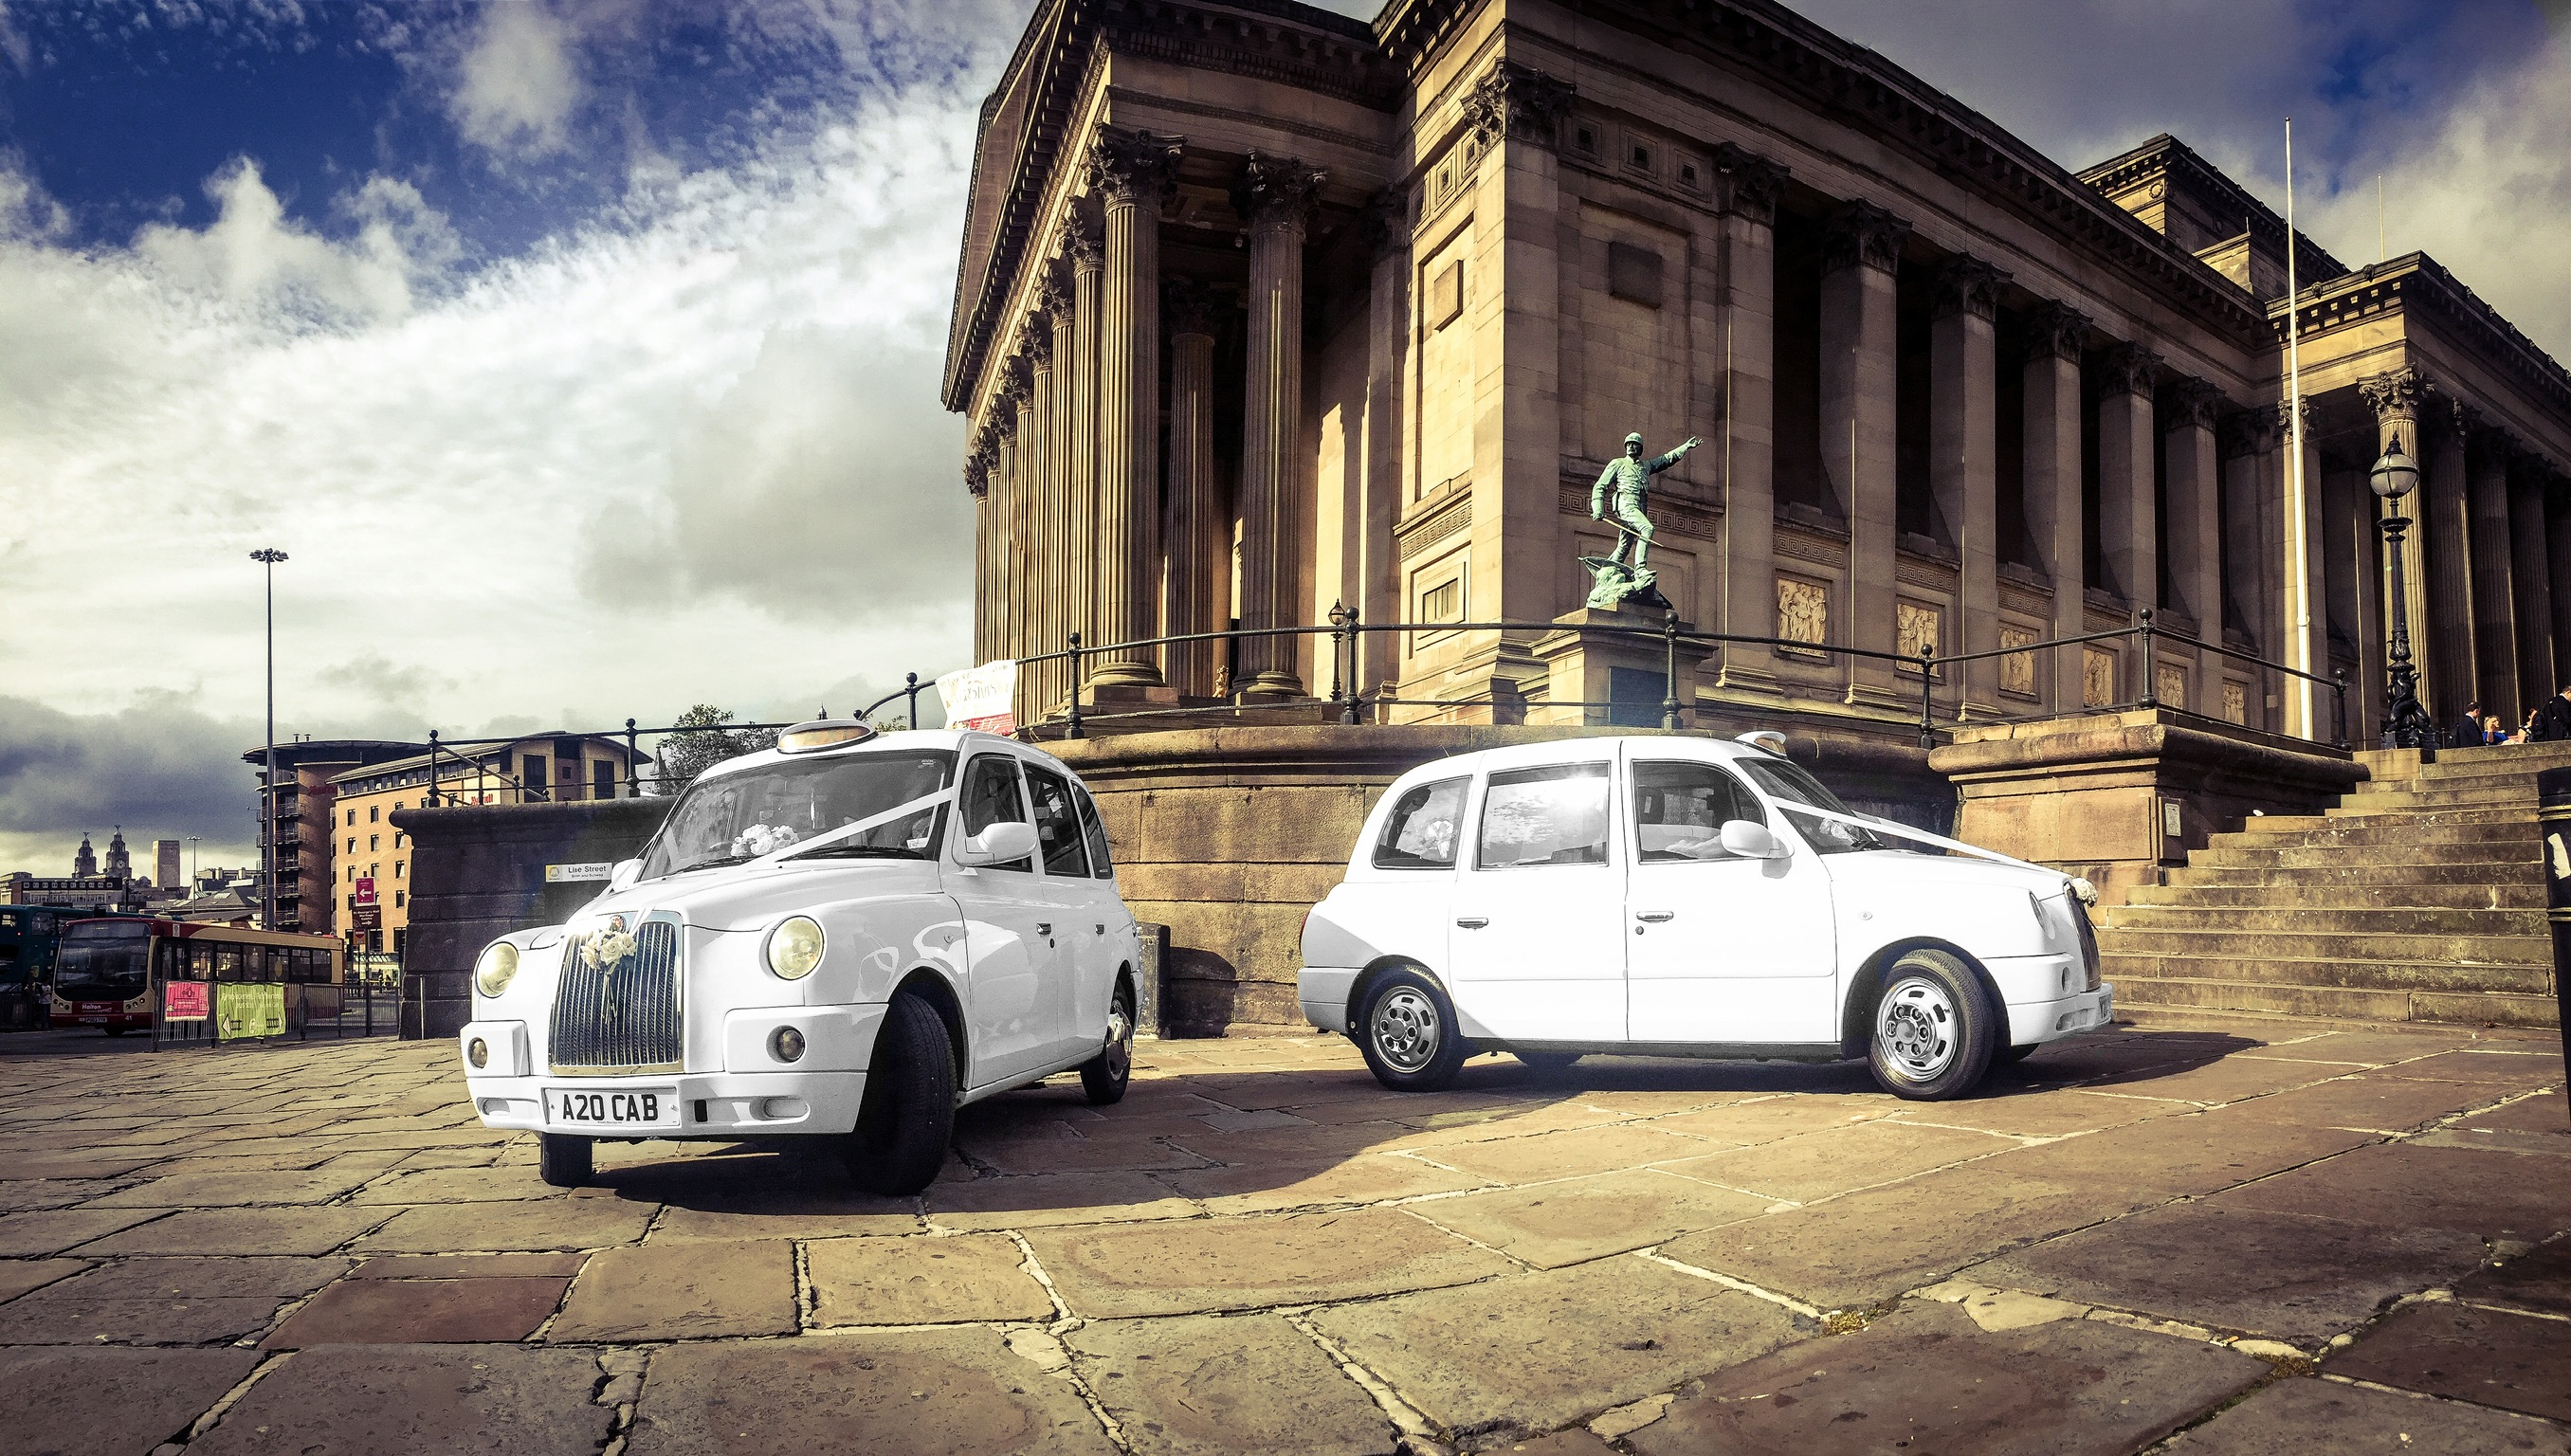 liverpool wedding taxis, st georges hall, lyme street station taxi idotaxi wedding taxis